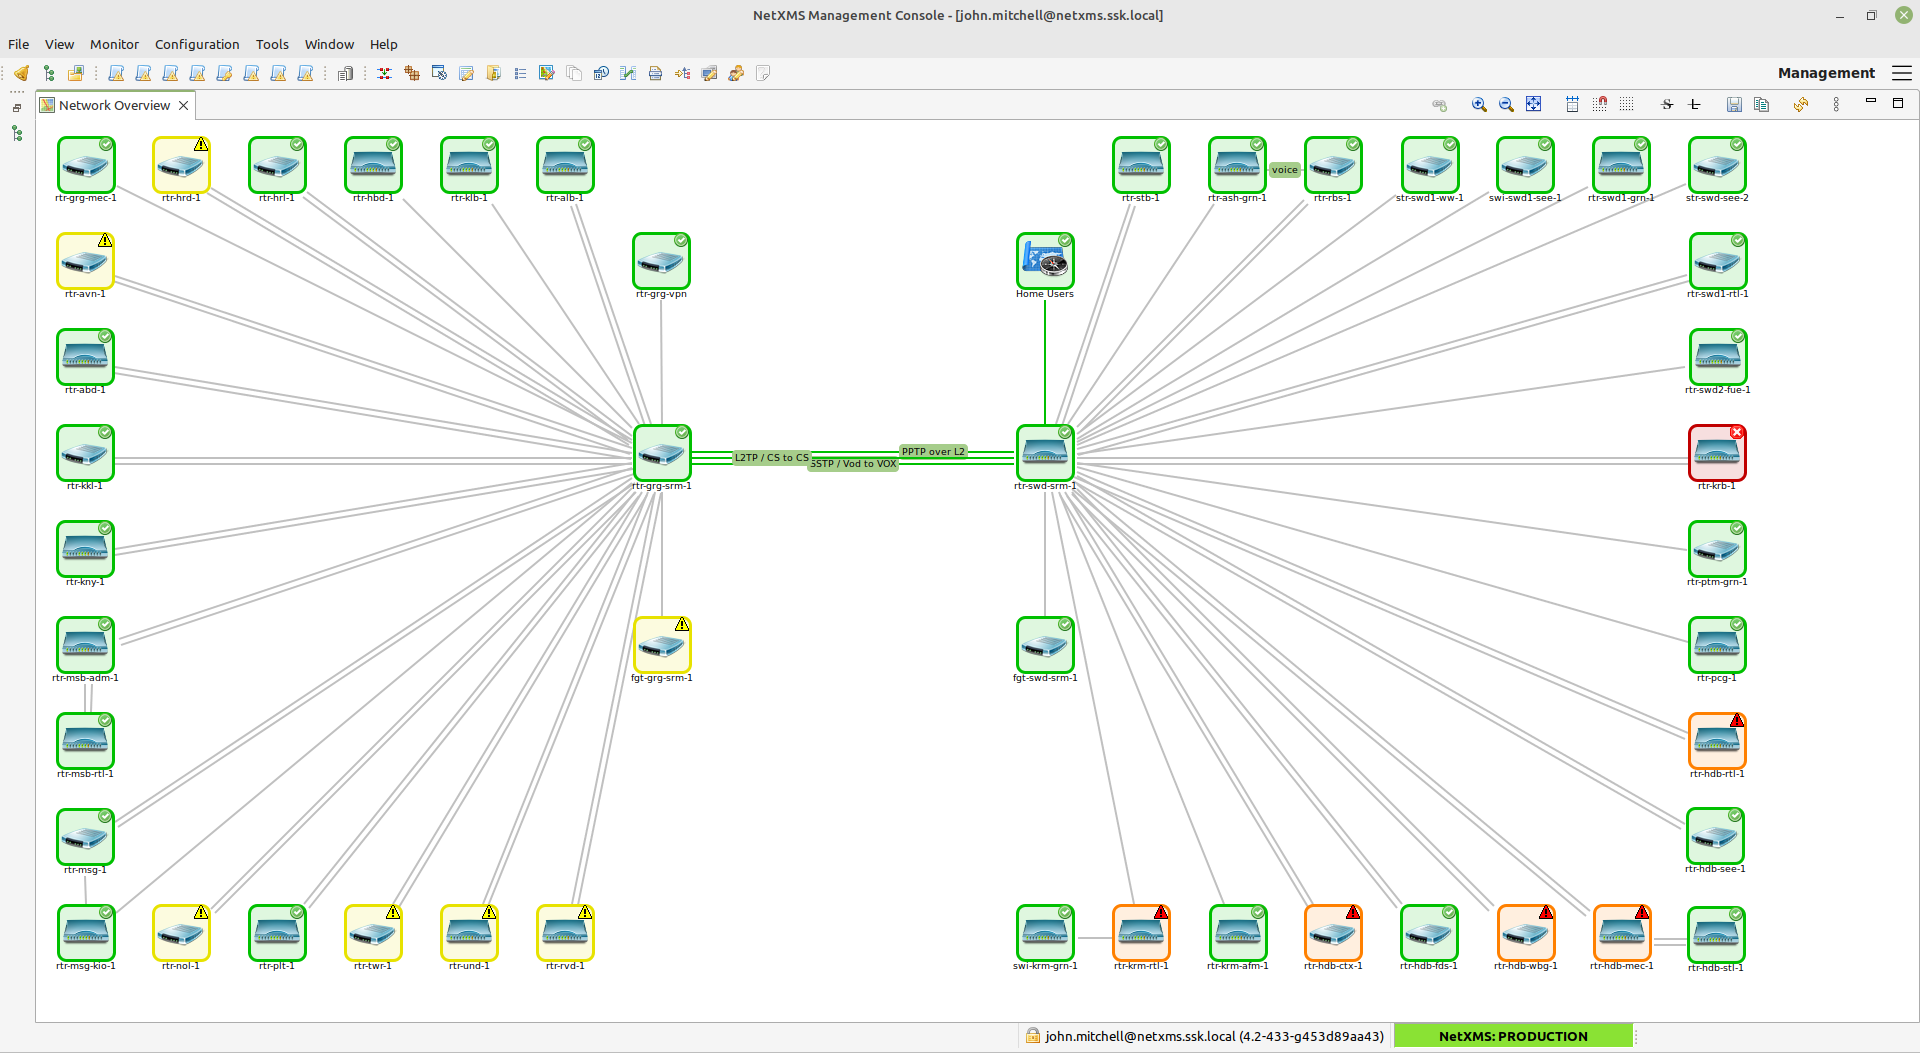 SSK's Network Overview dashboard, it is used to see the organisation’s overlay network at a glance